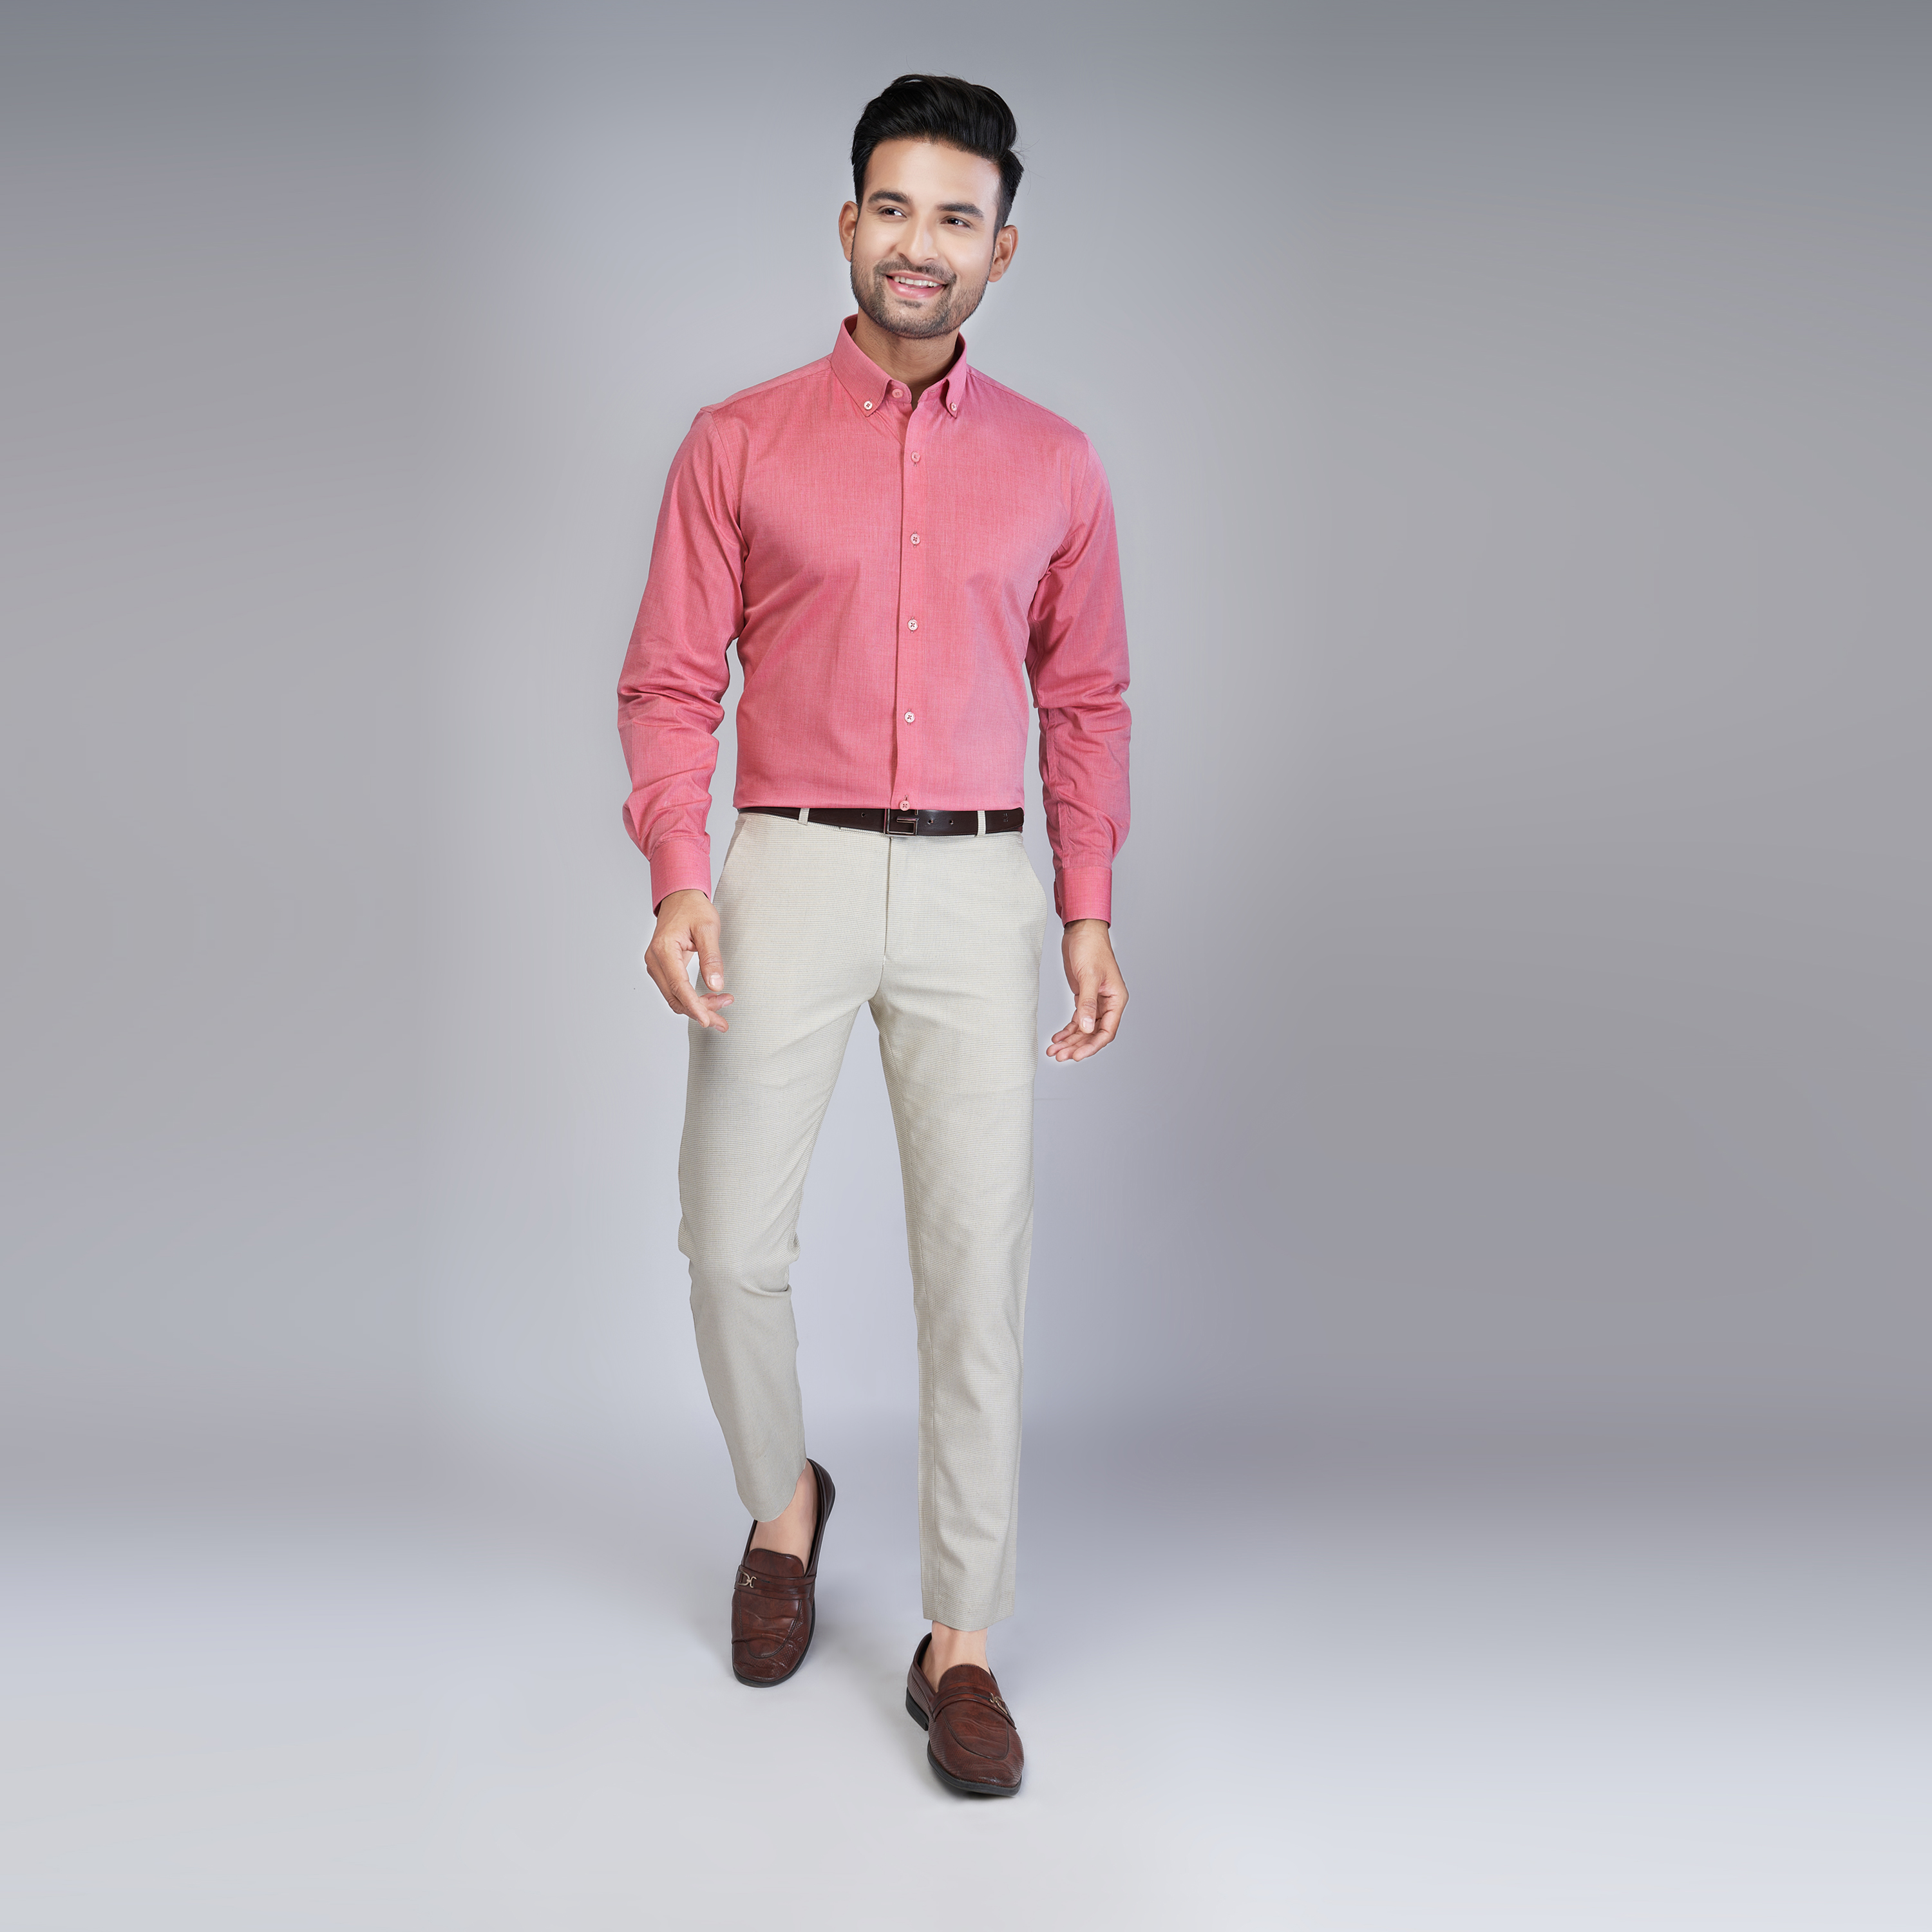 Shirt and Pant Combinations